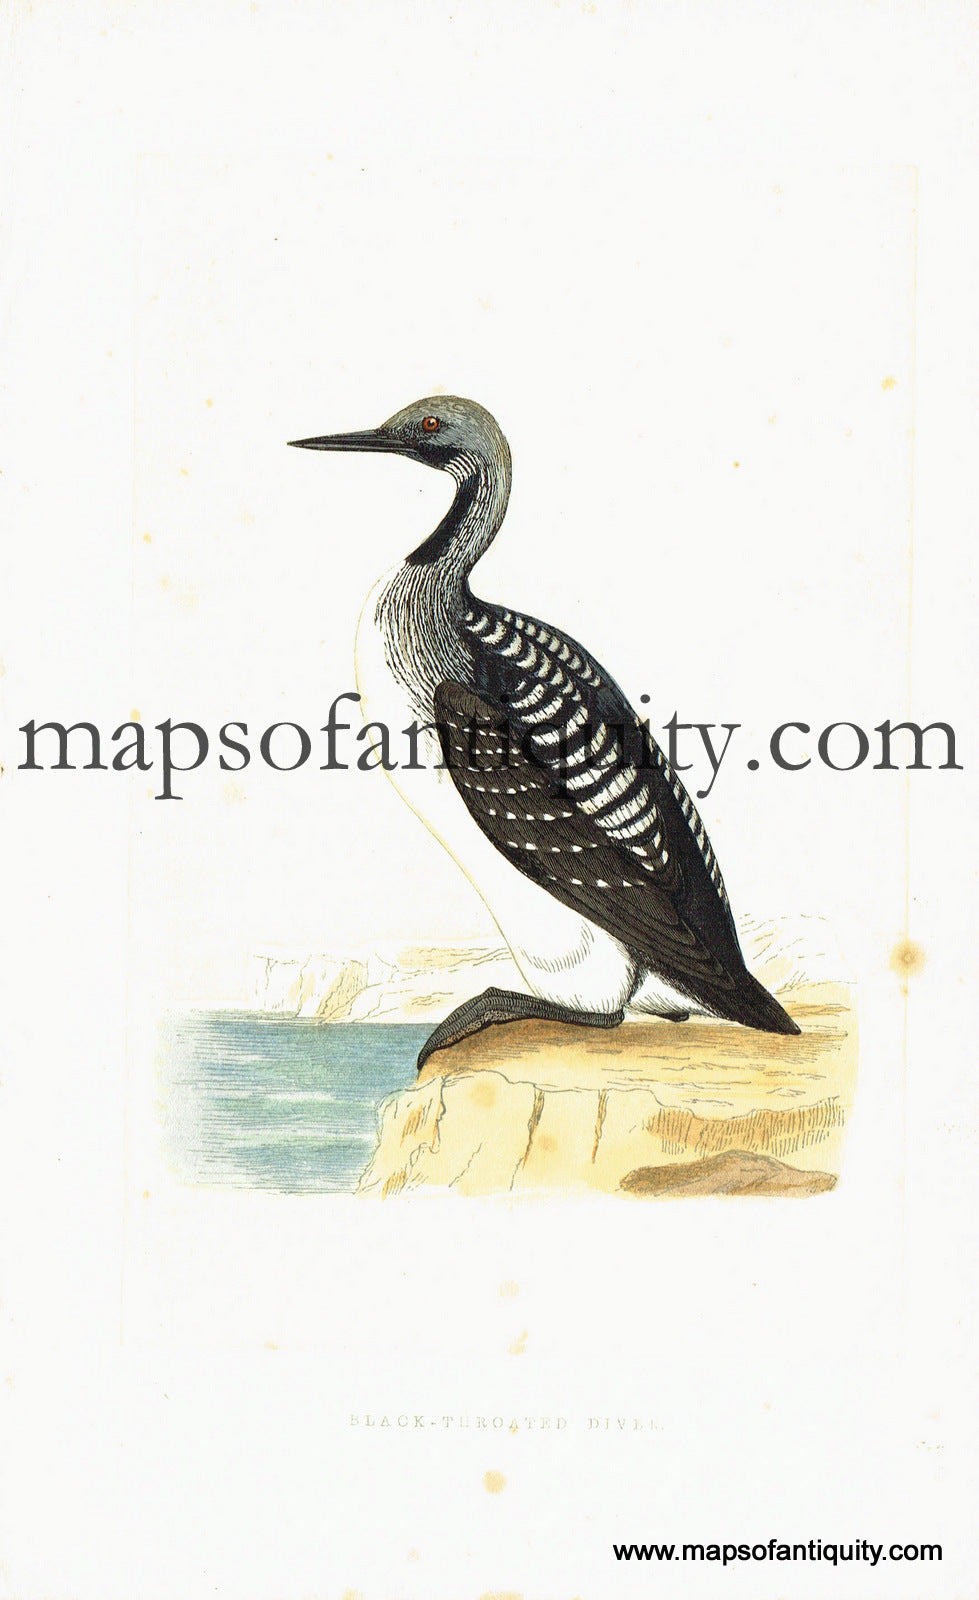 Antique-Hand-Colored-Engraved-Illustration-Black-throated-Diver-Antique-Prints-Natural-History-Birds-c.-1860-Morris-Maps-Of-Antiquity